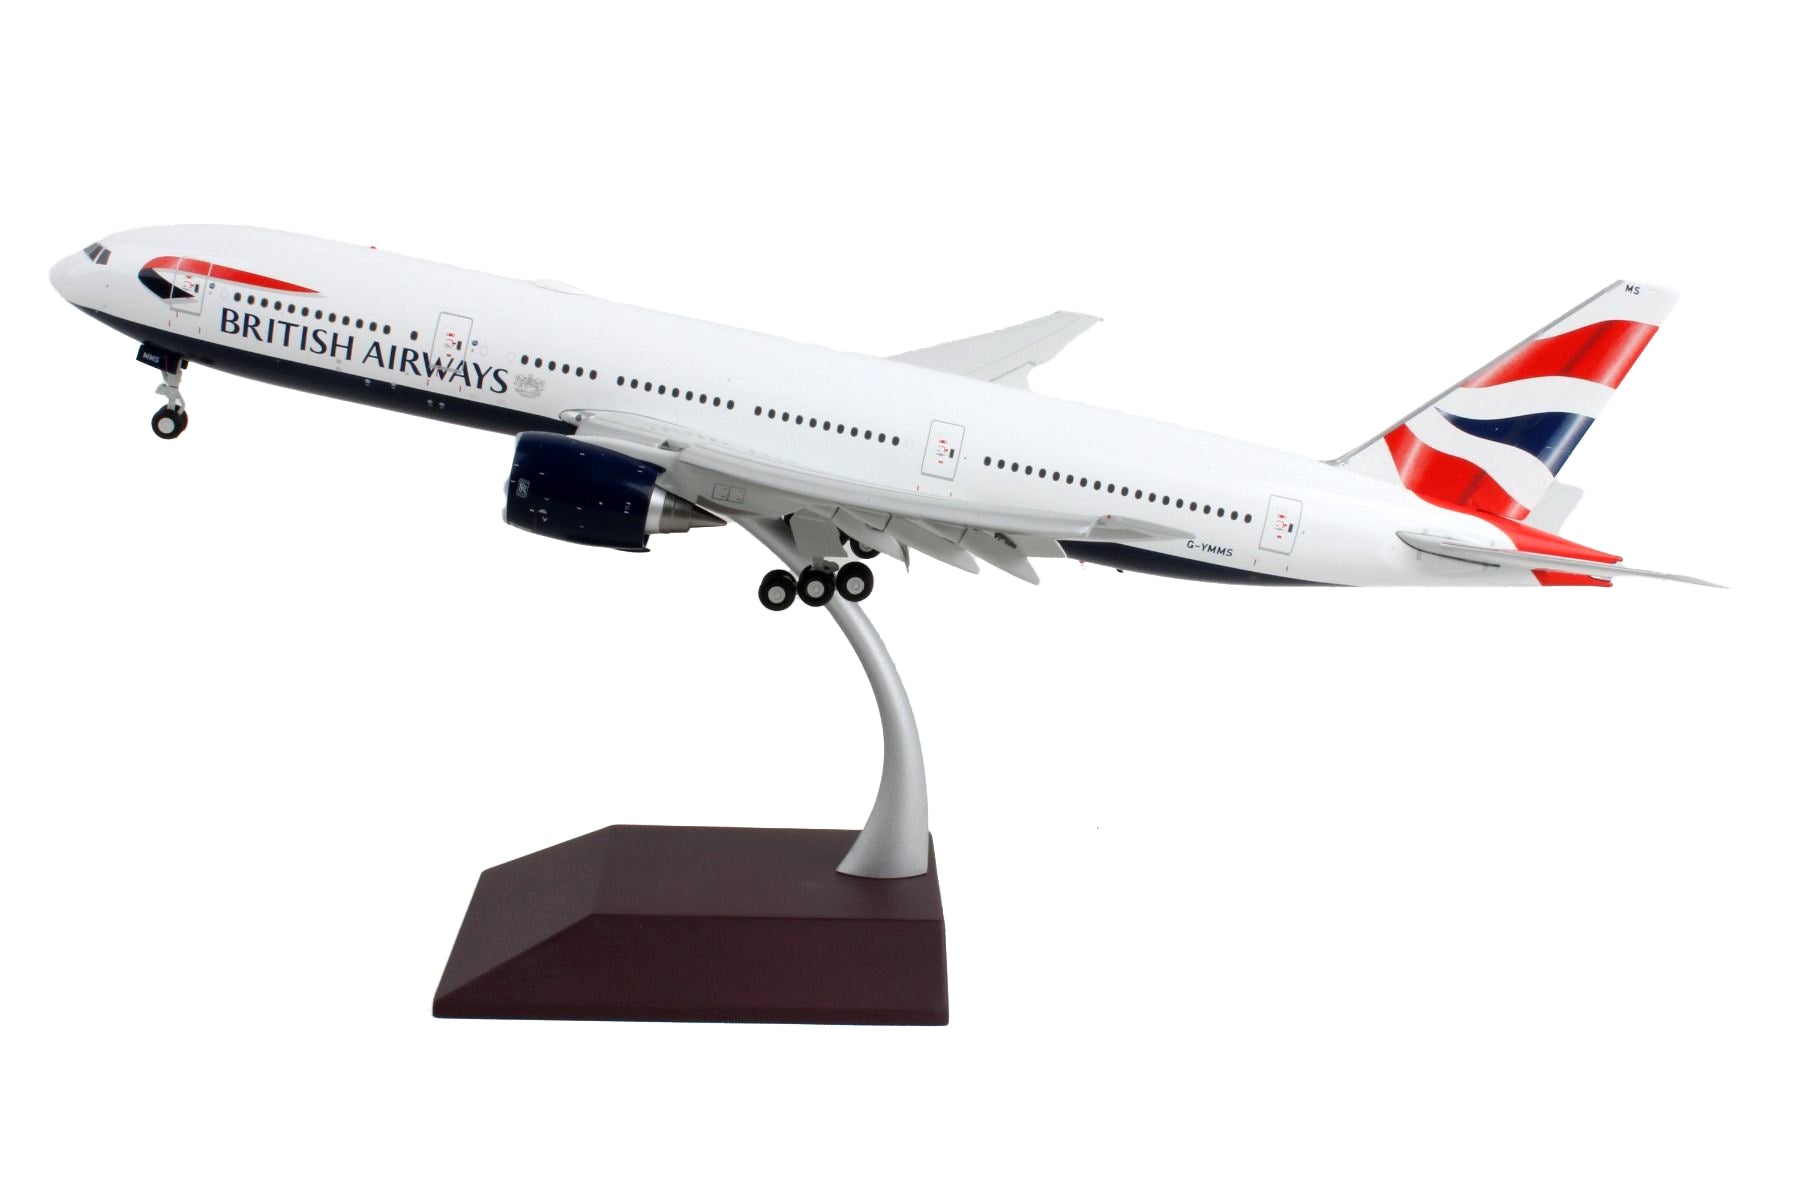 Boeing 777-200ER Commercial Aircraft with Flaps Down "British Airways" White with Striped Tail